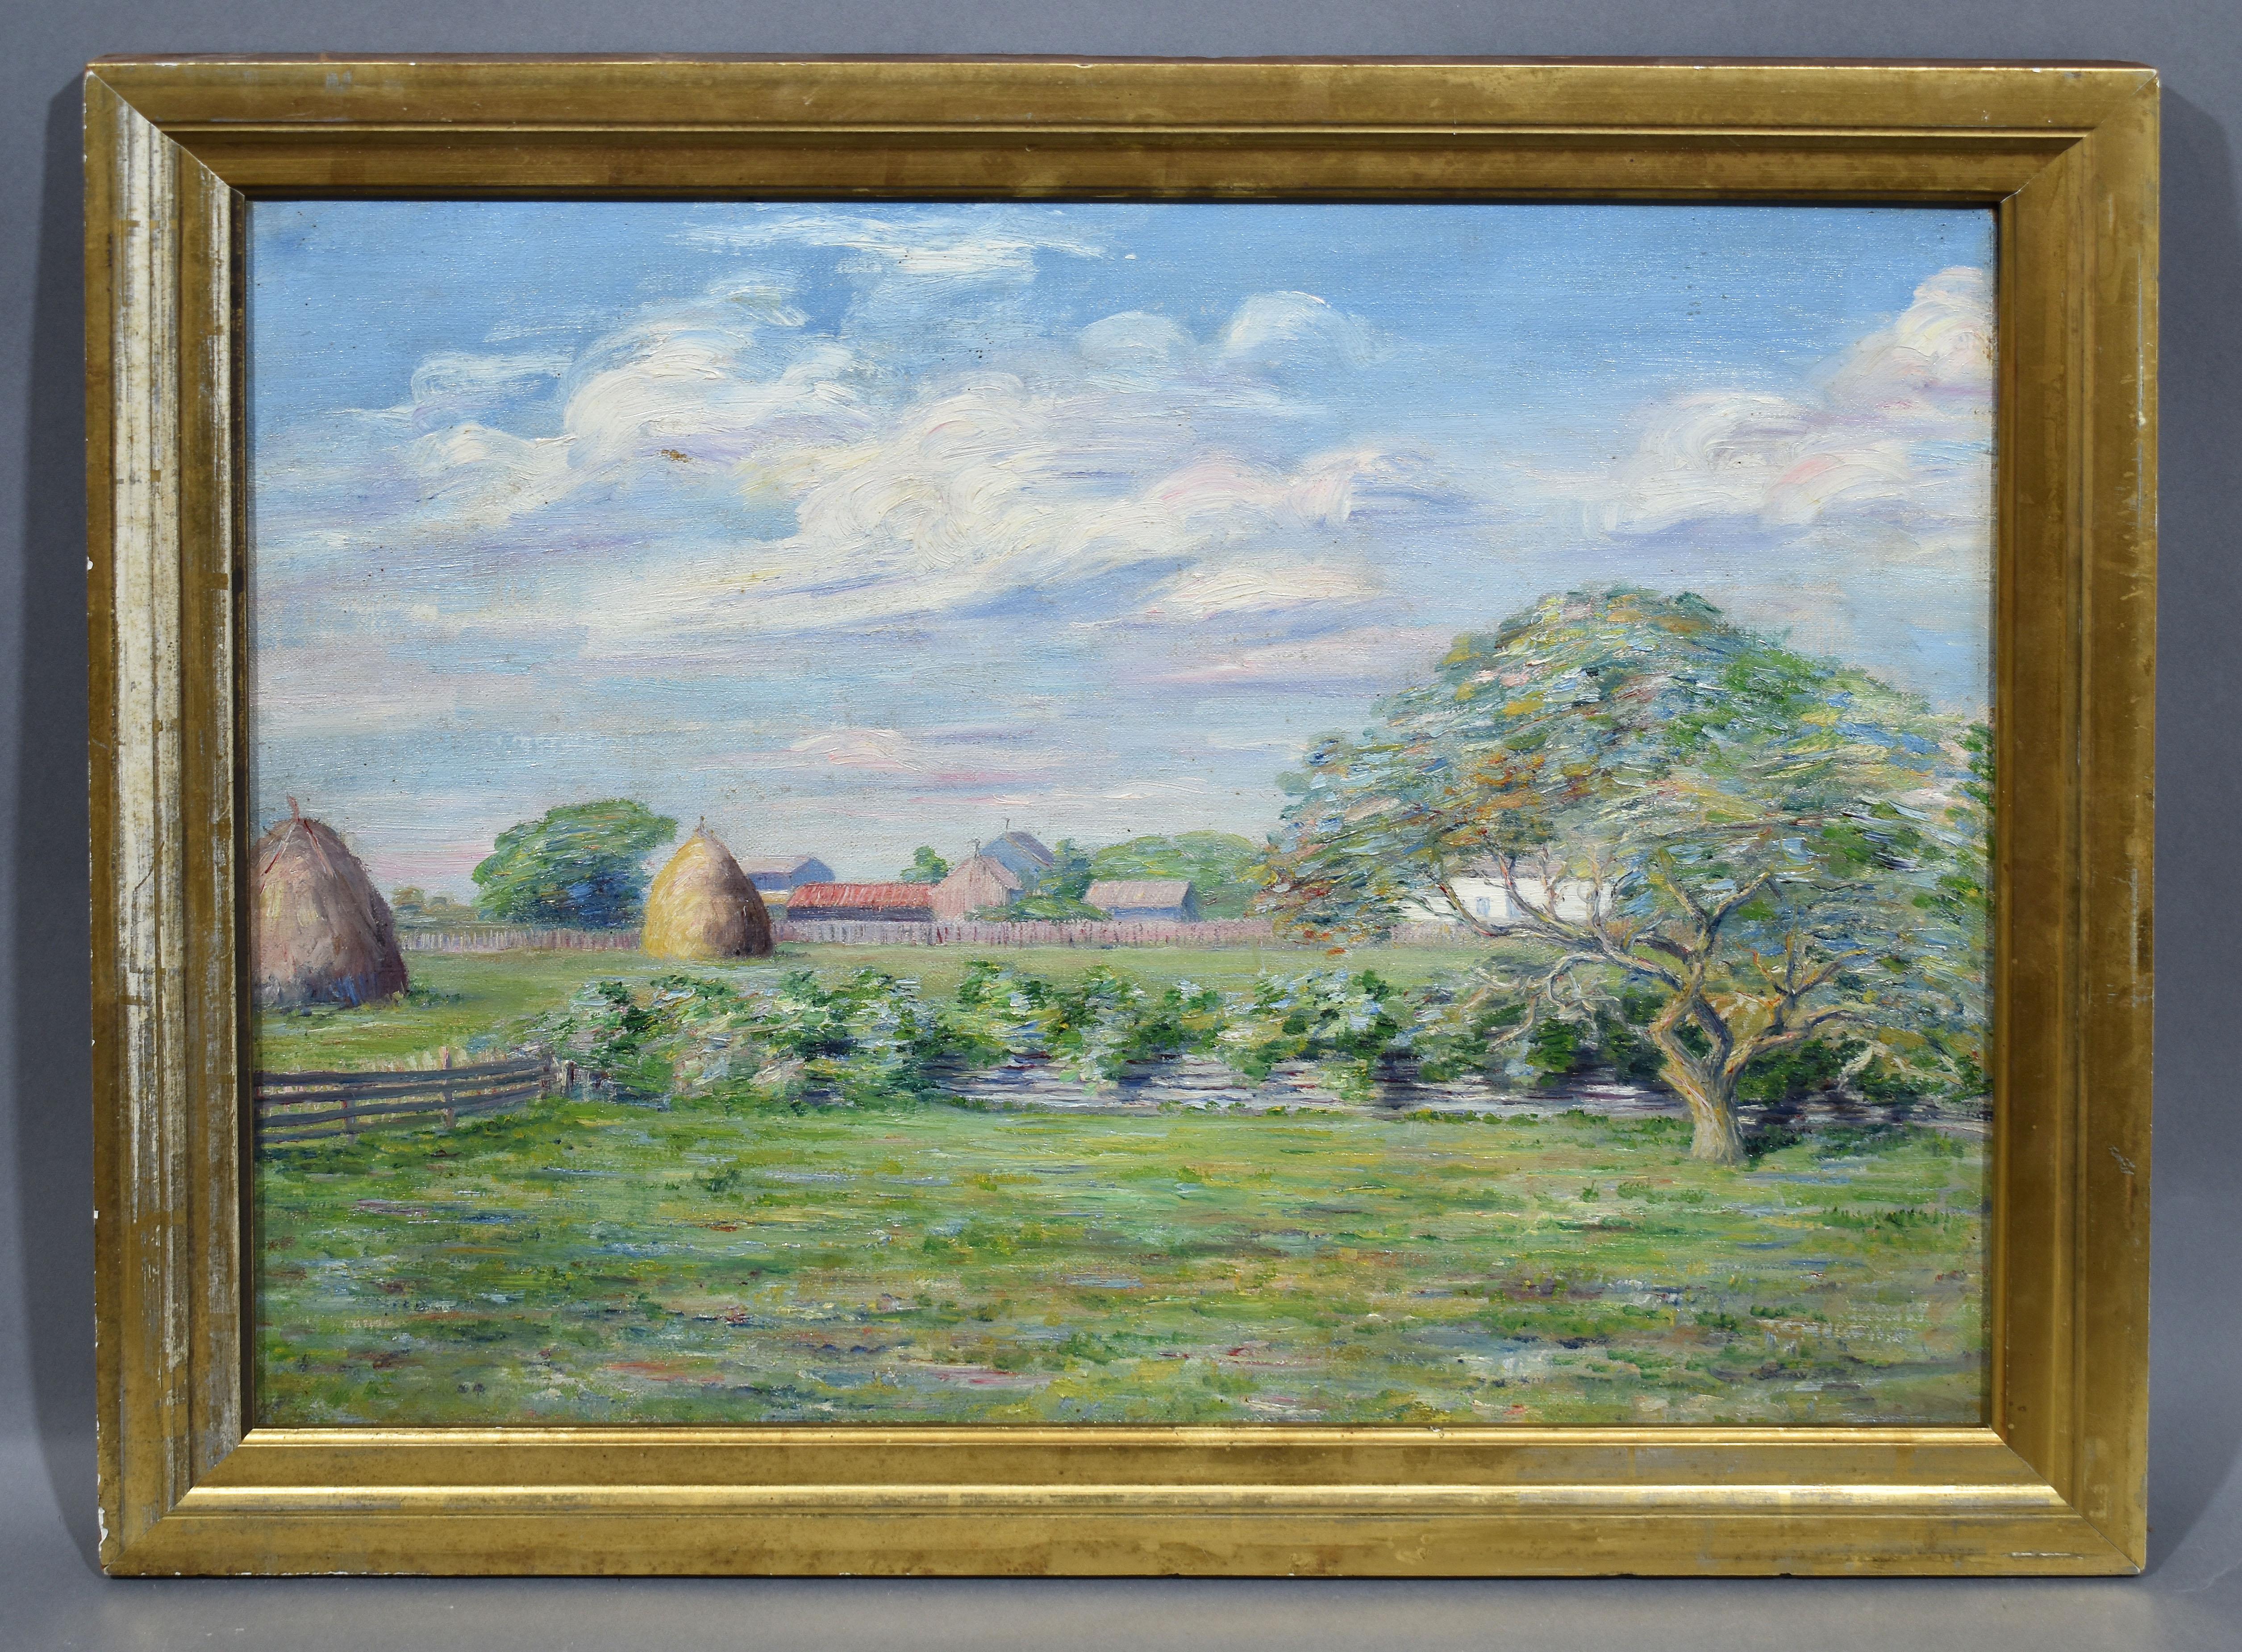 Impressionist view of a farm with hay-bales by Lucy Hariot Booth  (1869 - 1952).  Oil on canvas, circa 1900.  Unsigned.  Displayed in a giltwood frame.  Image size, 20